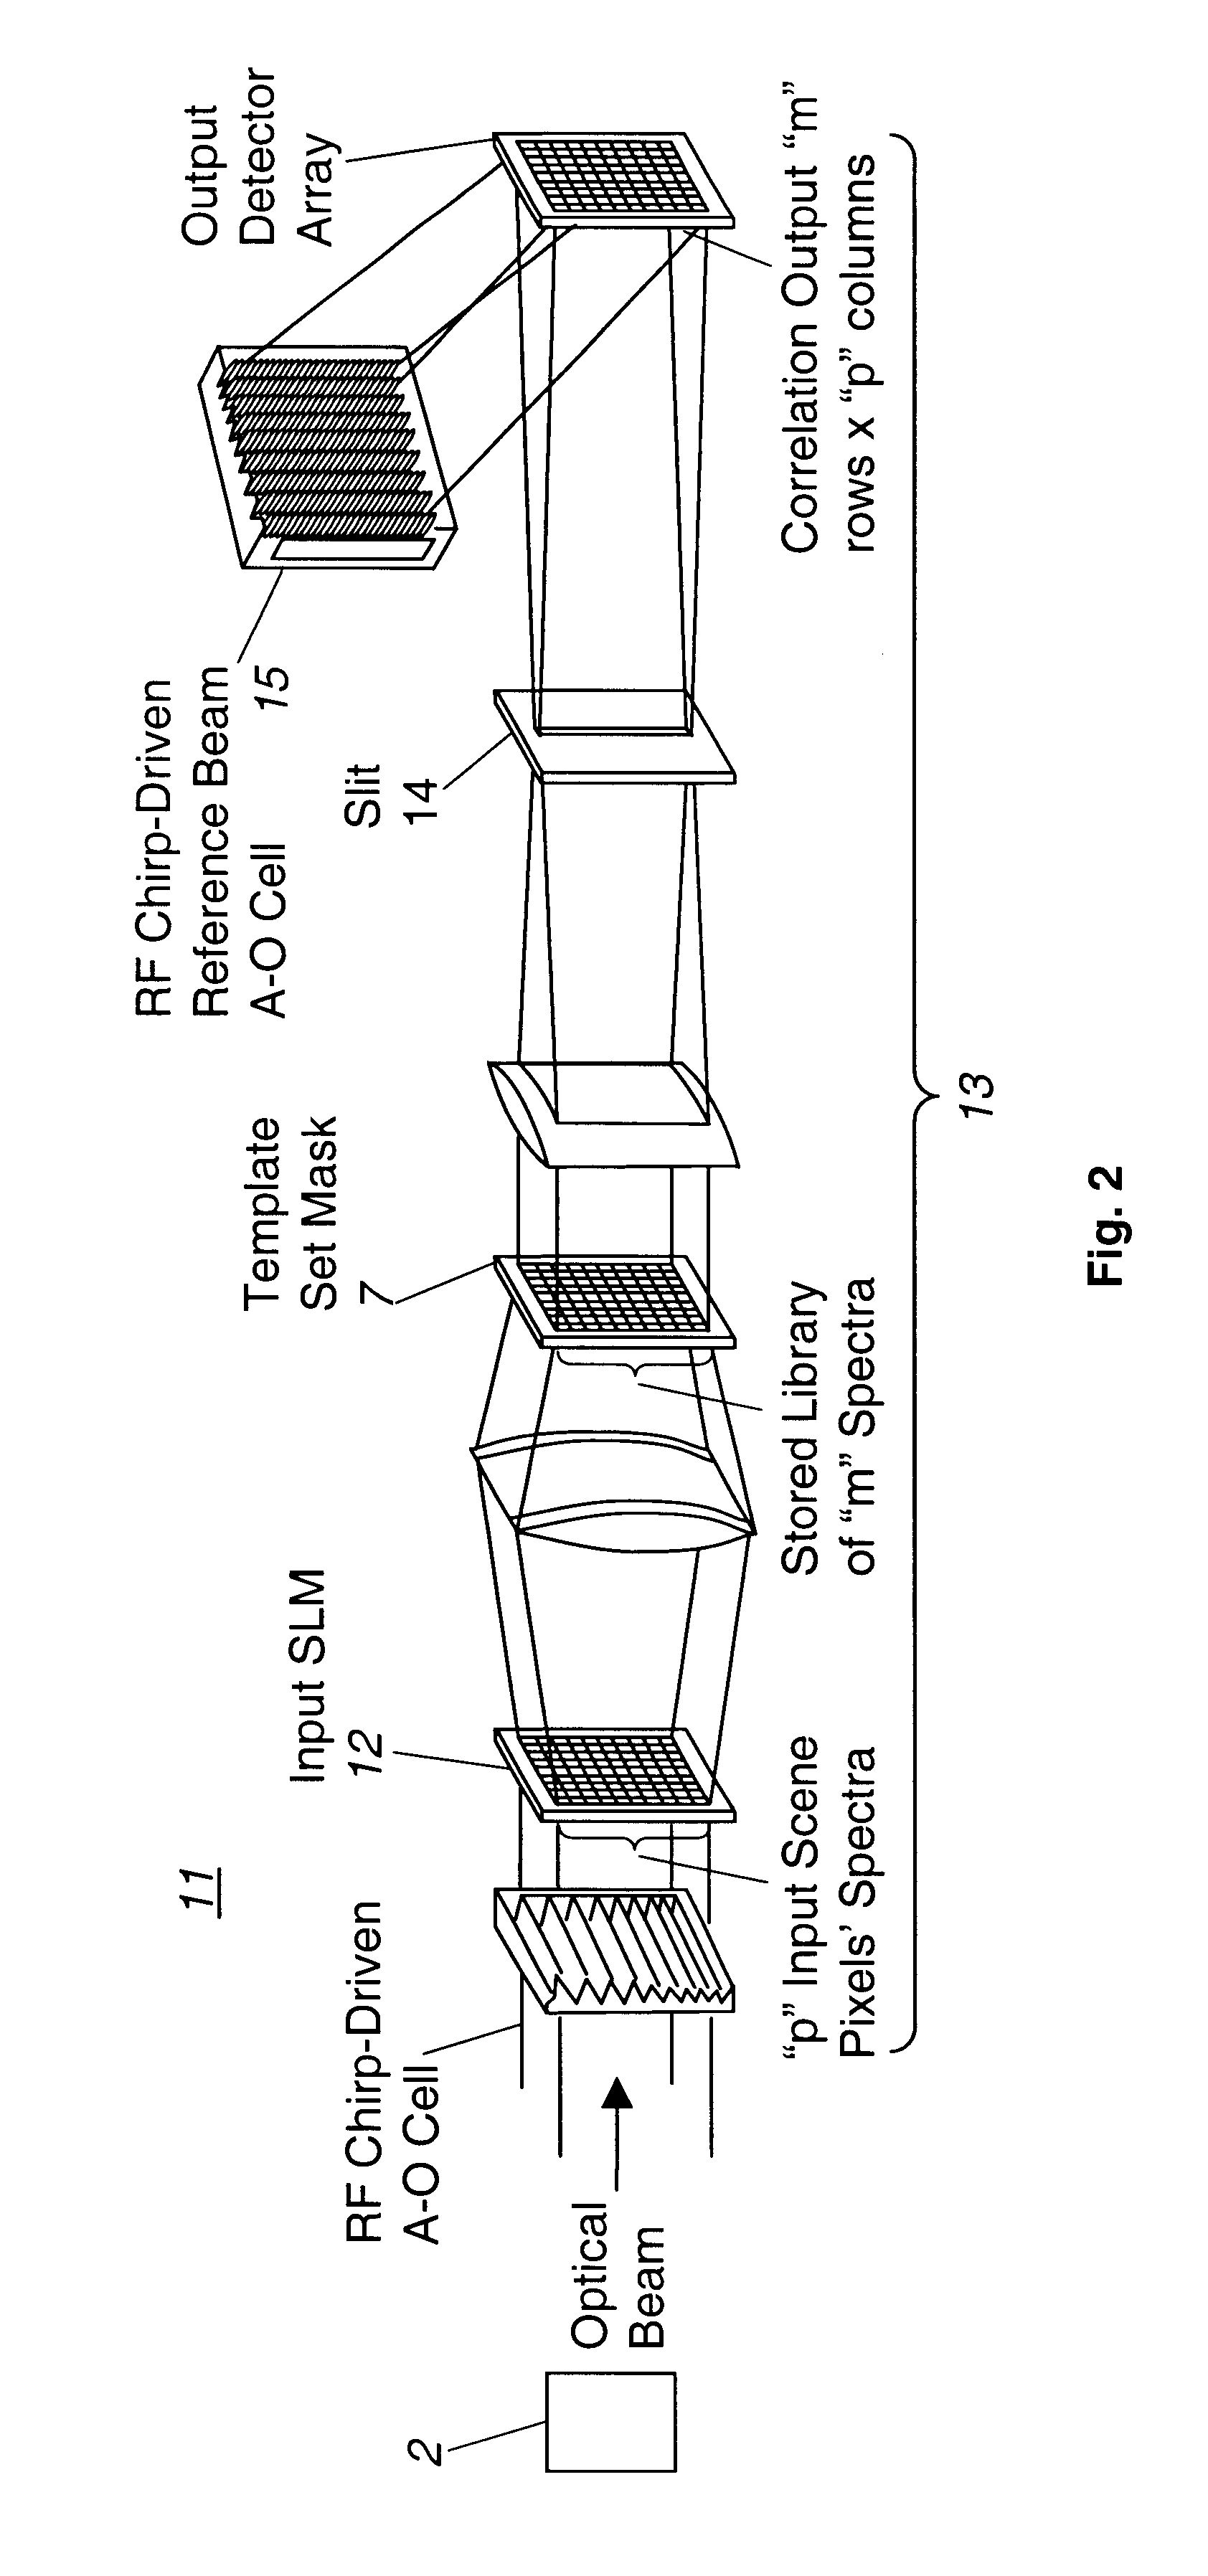 Multispectral imaging system and method